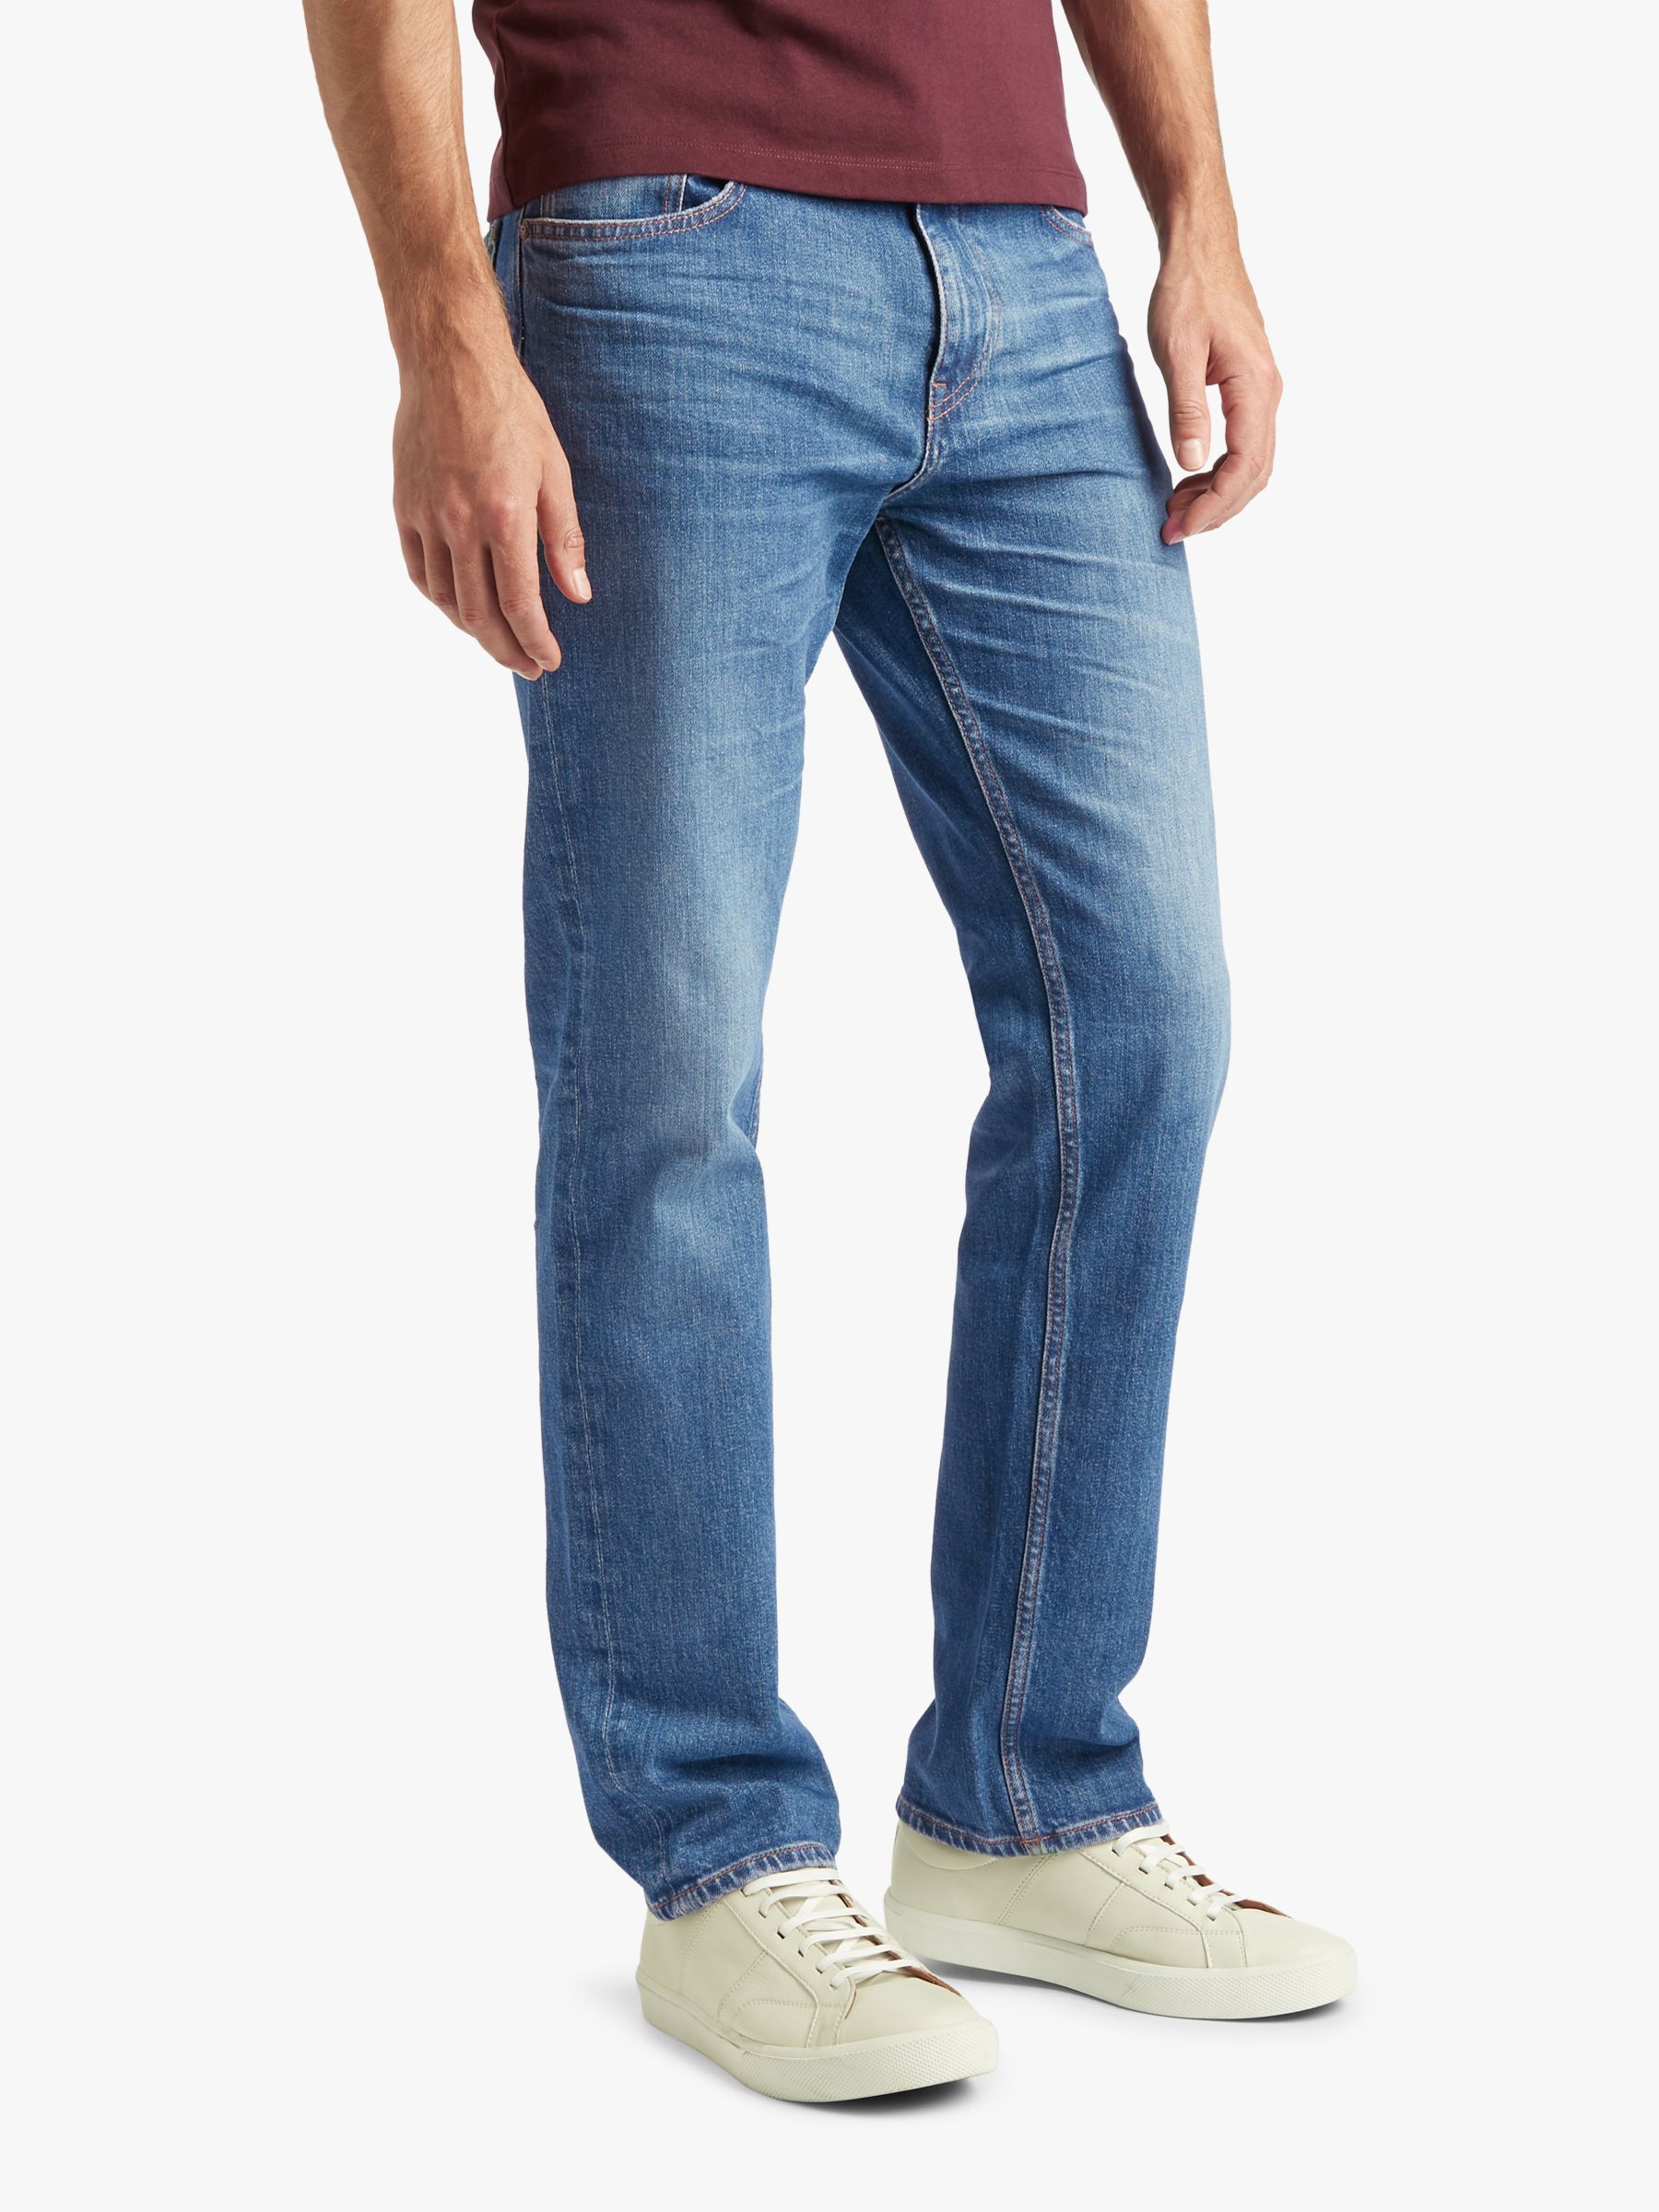 hugo boss albany jeans relaxed fit